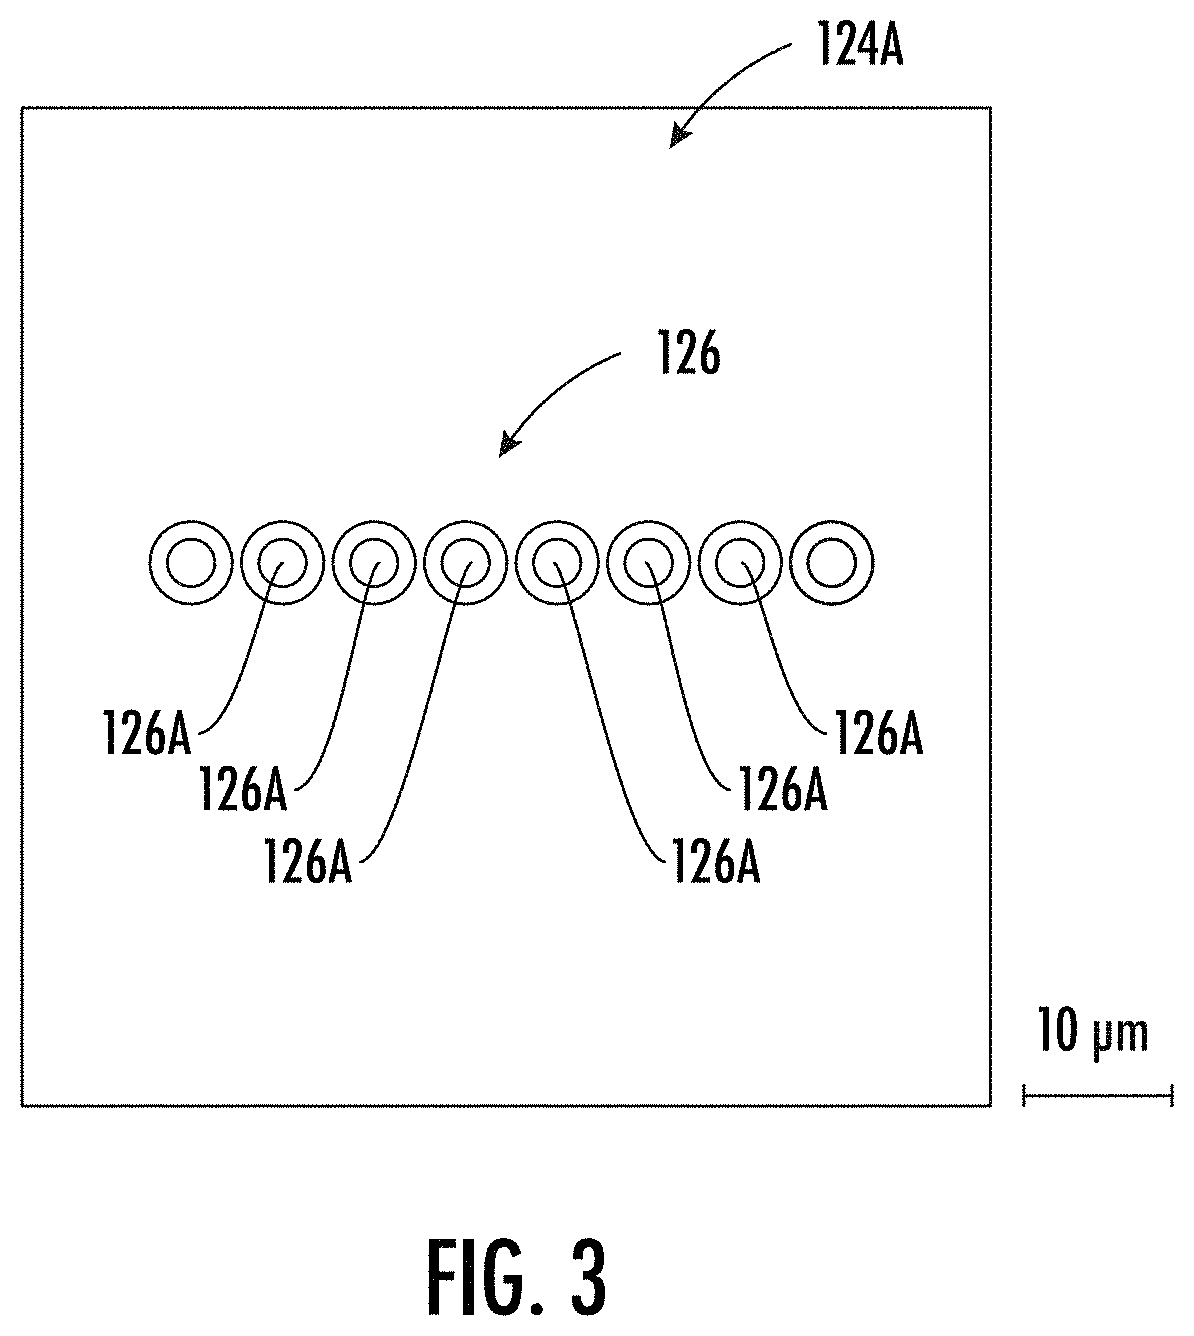 Laser-cleaving of an optical fiber array with controlled cleaving angle